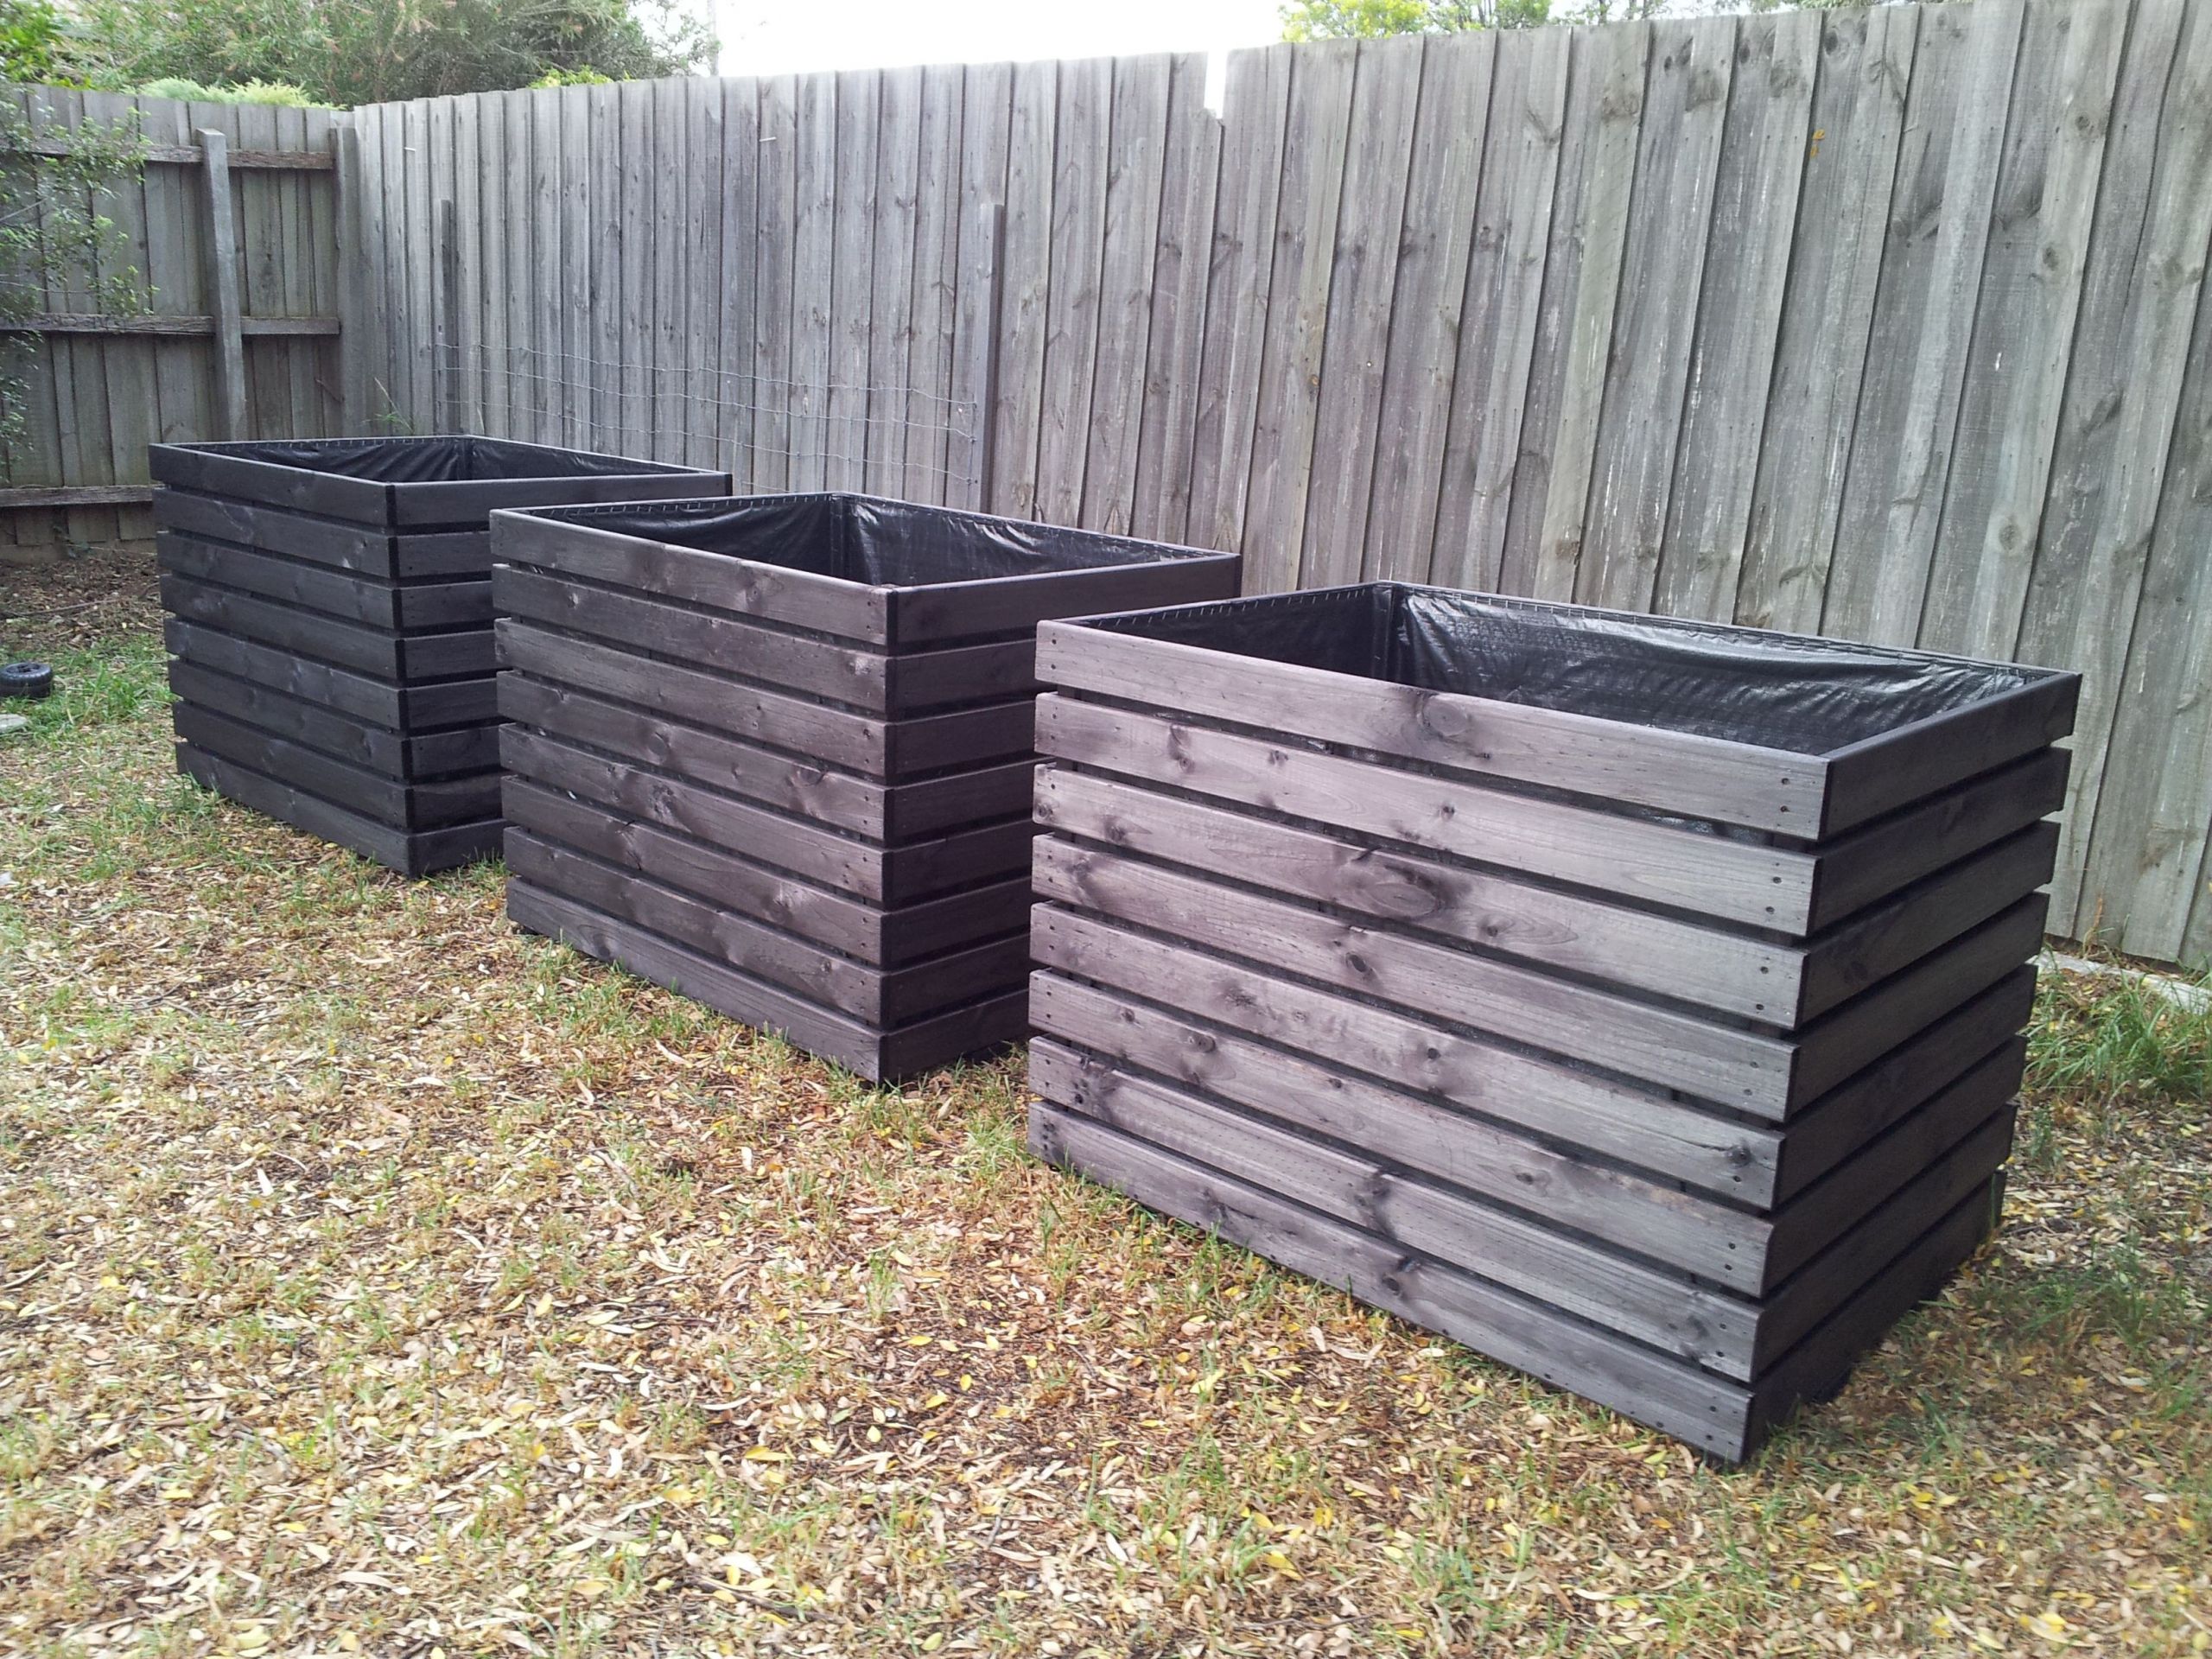 DIY Large Planter Boxes
 Extra large planter boxes stained in black